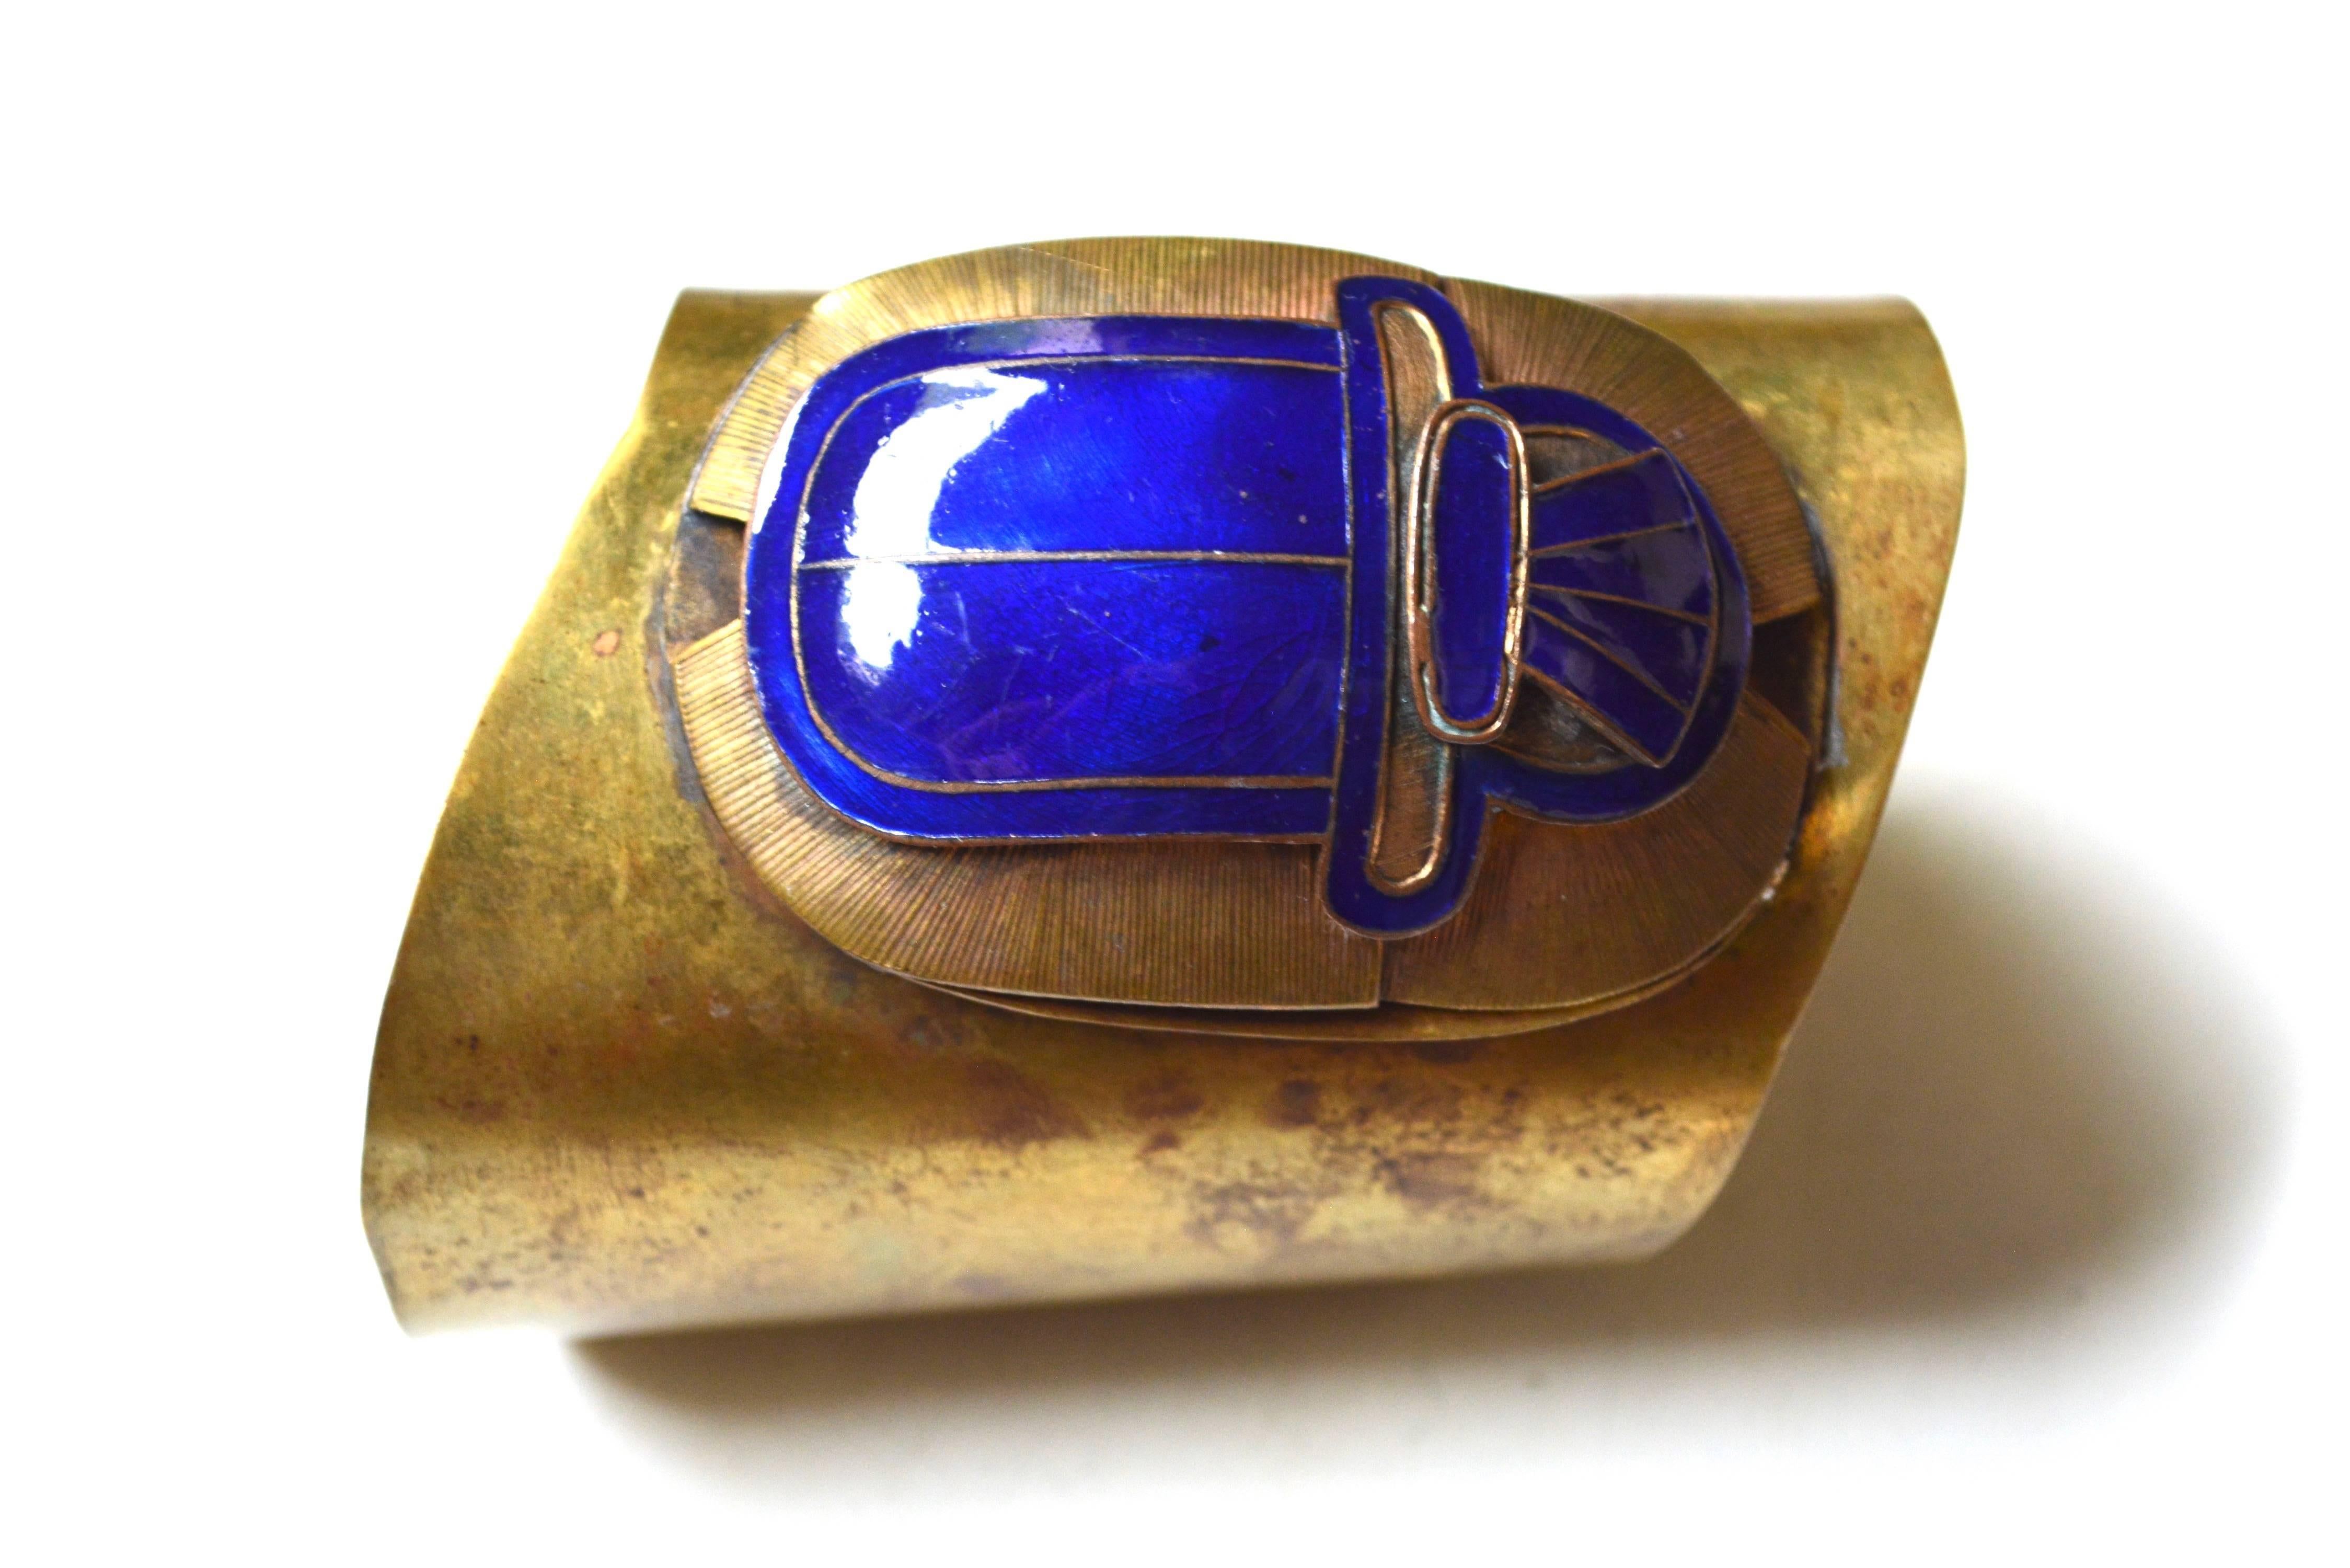 1920s art deco Egyptian revival at its best! The scarab is a gorgeous blue and huge. The metal appears to be brass. From a European collection of jewelry. The cuff at the widest part measures 3" wide and sort of wraps with an initial opening of